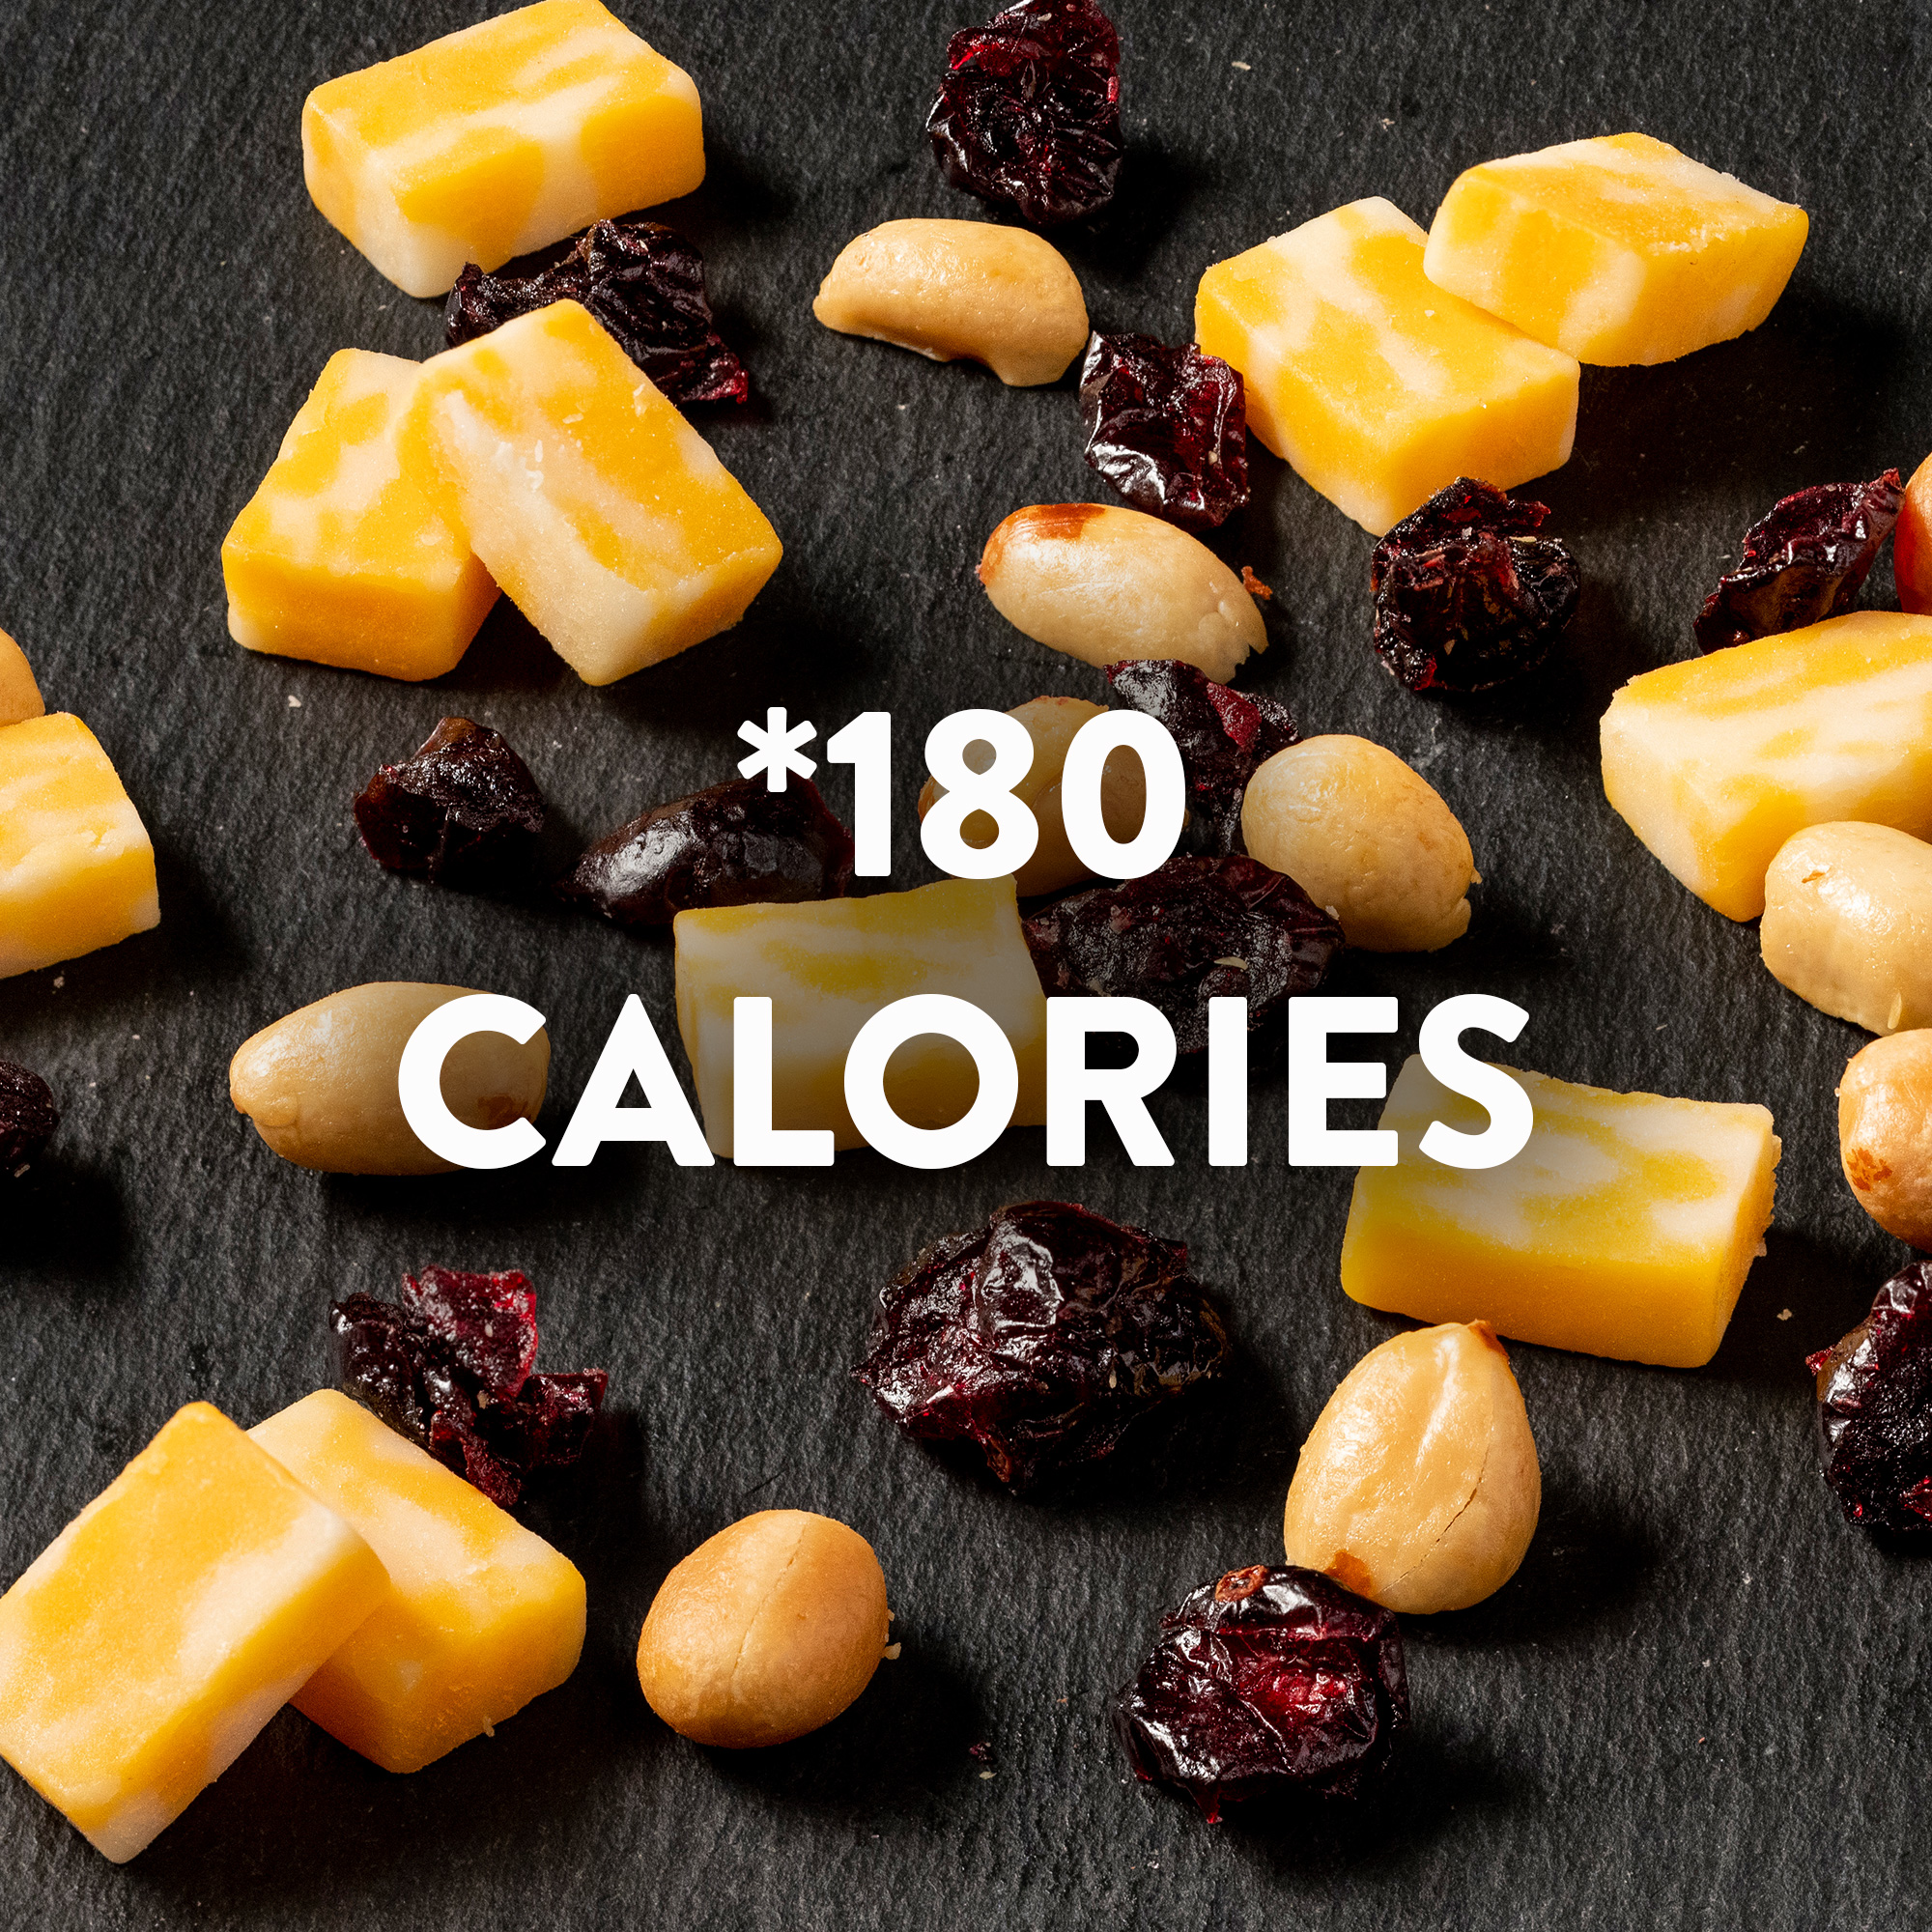 Sargento® Balanced Breaks®, Colby-Jack Natural Cheese, Sea-Salted Peanuts and Blueberry Juice-Infused Dried Cranberries